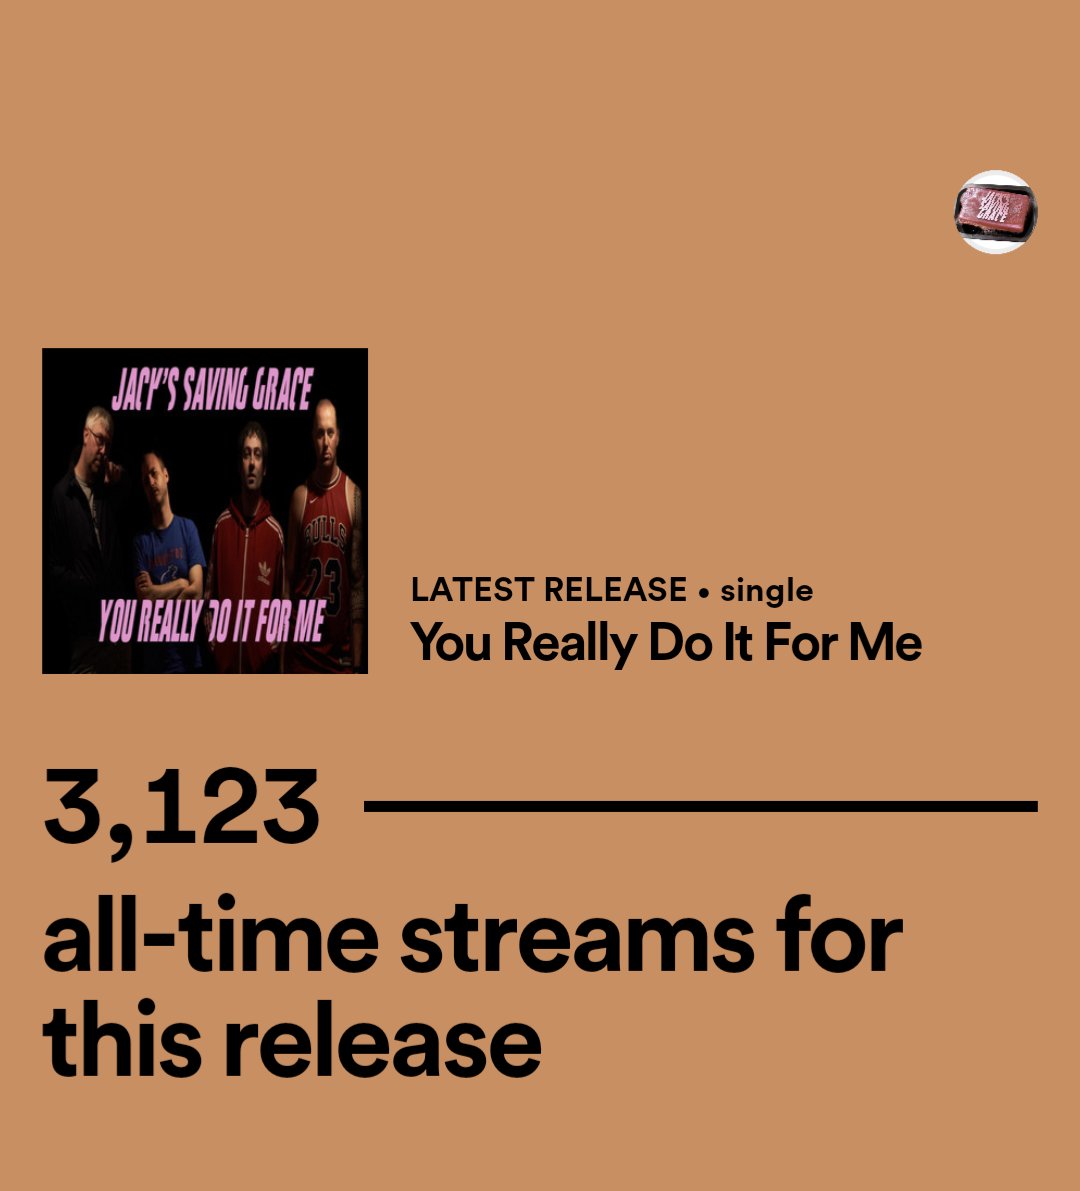 So it's officially 2 weeks since the release of 'You Really Do it for me' and we're past 3k streams on Spotify. Thanks for all the love and support from everyone who has listened. Let's keep the momentum going and see if we can get to 5k streams. Keep listening and keep sharing!